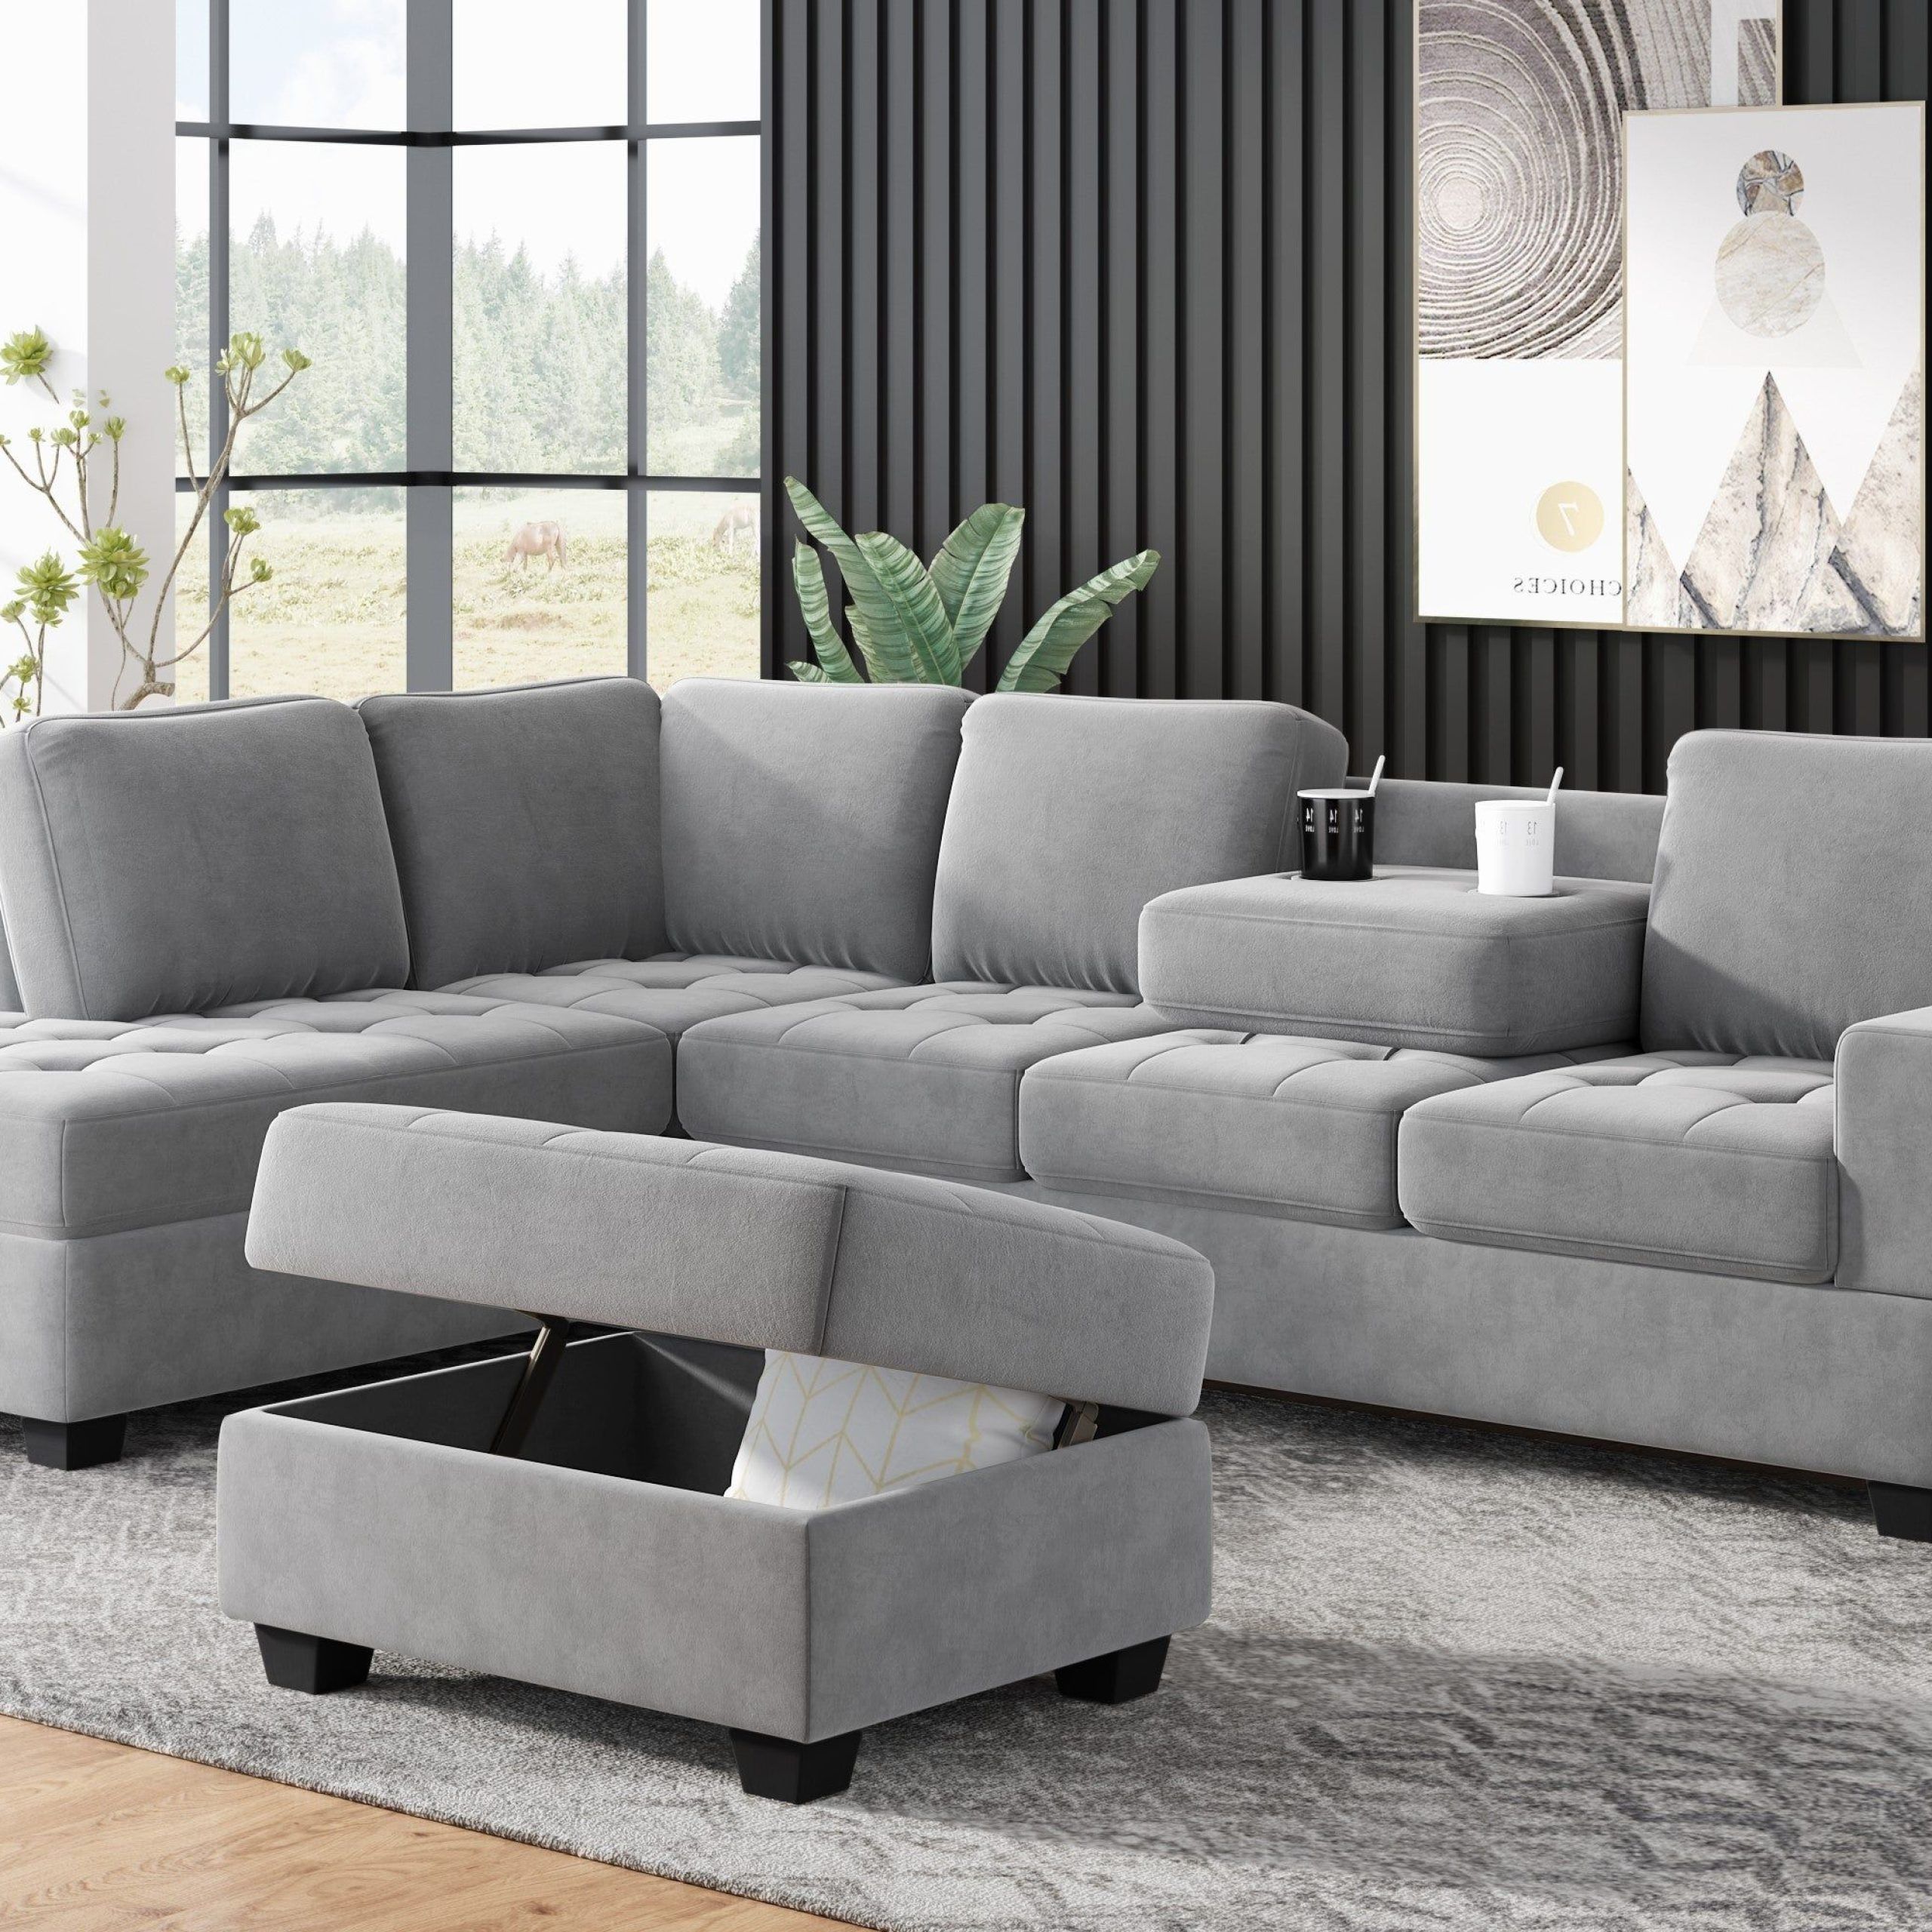 Convertible L Shaped Sectional Sofa With Reversible Chaise, Storage Ot Within Convertible L Shaped Sectional Sofas (View 19 of 20)